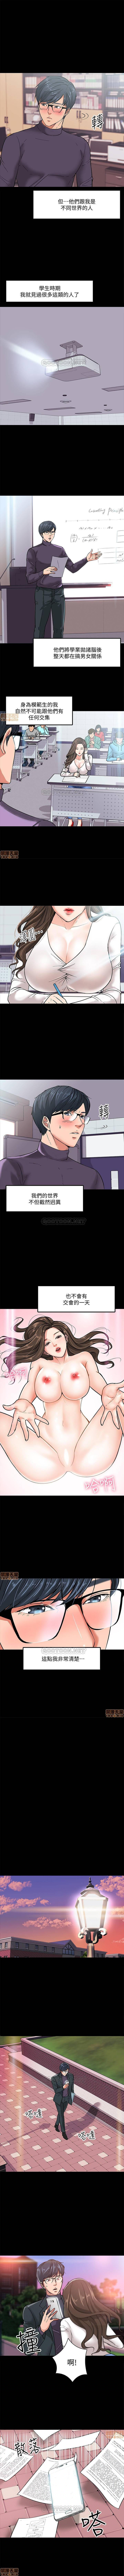 Rough Fucking PROFESSOR, ARE YOU JUST GOING TO LOOK AT ME? | DESIRE SWAMP | 教授，你還等什麼? Ch. 2 [Chinese] Manhwa Plumper - Page 6